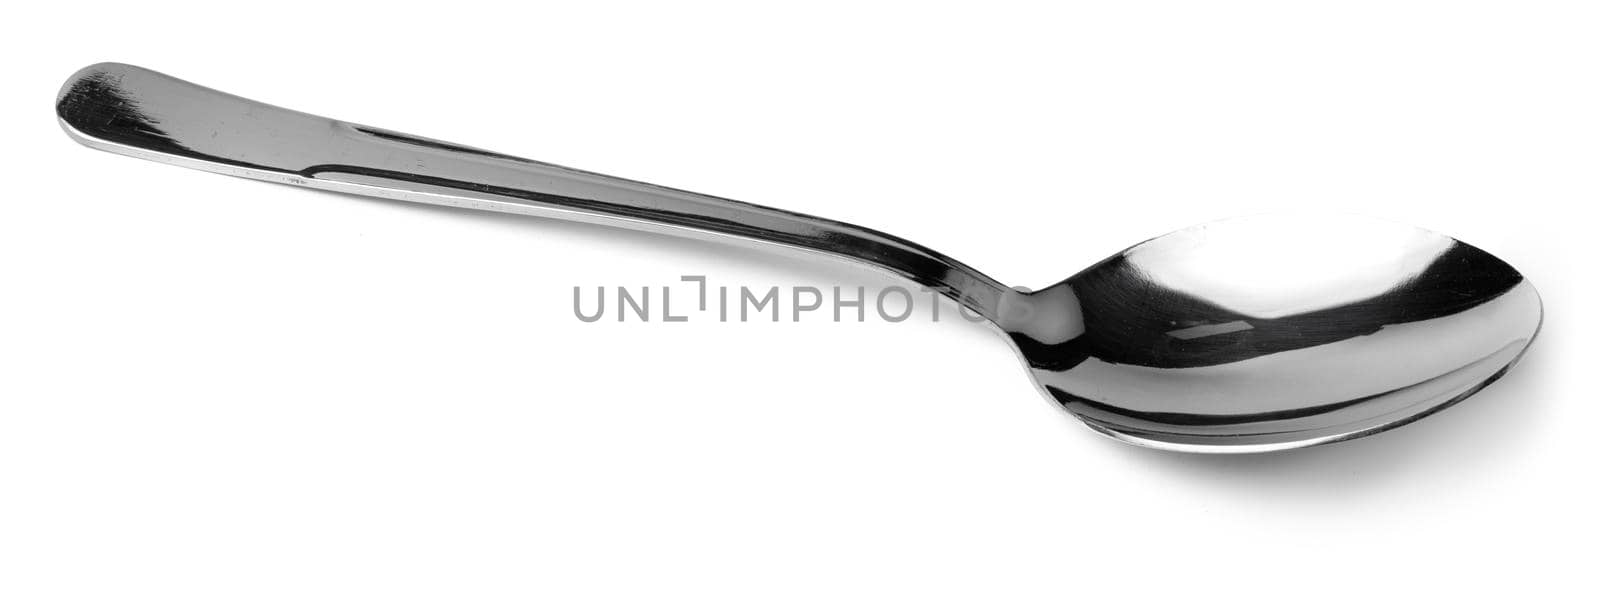 Silver spoon isolated on white background close up, cutlery